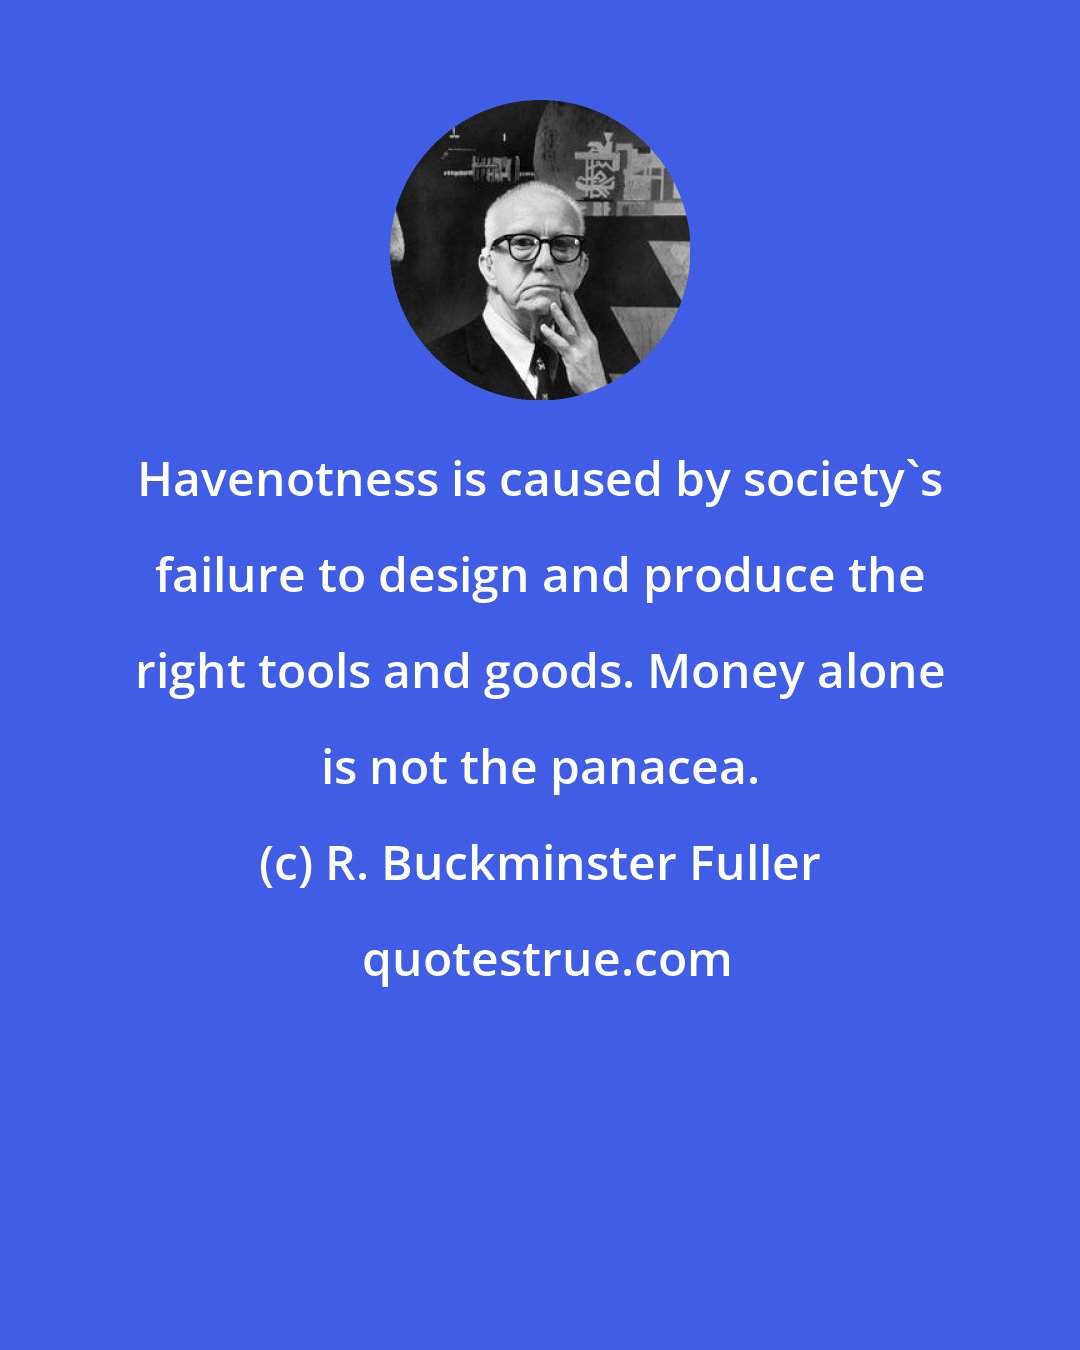 R. Buckminster Fuller: Havenotness is caused by society's failure to design and produce the right tools and goods. Money alone is not the panacea.